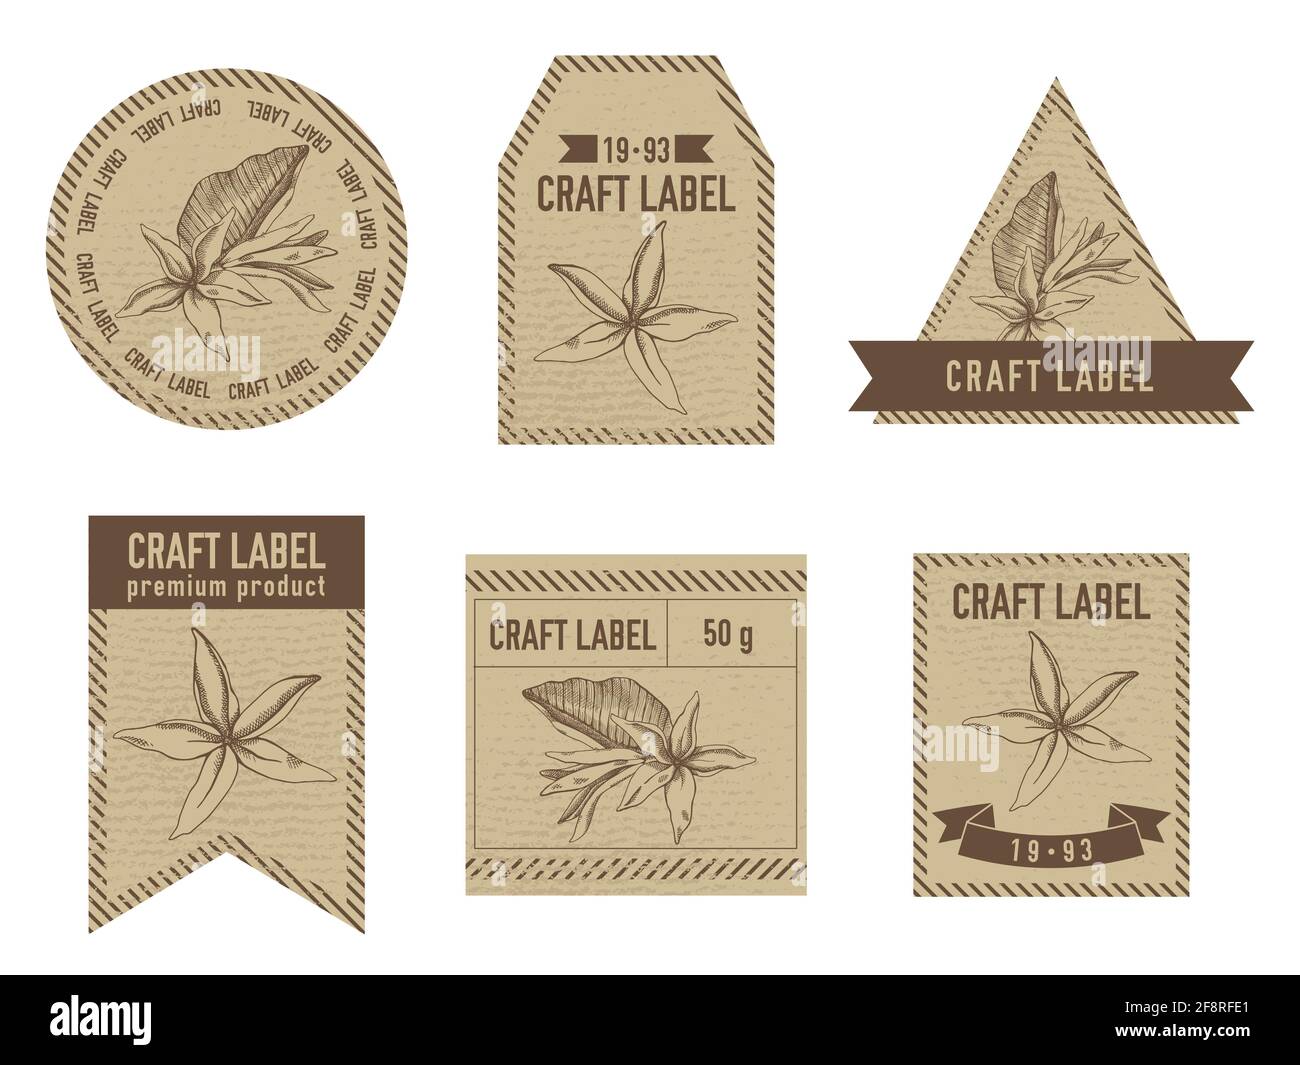 Craft labels vintage design with illustration of hancornia Stock Vector